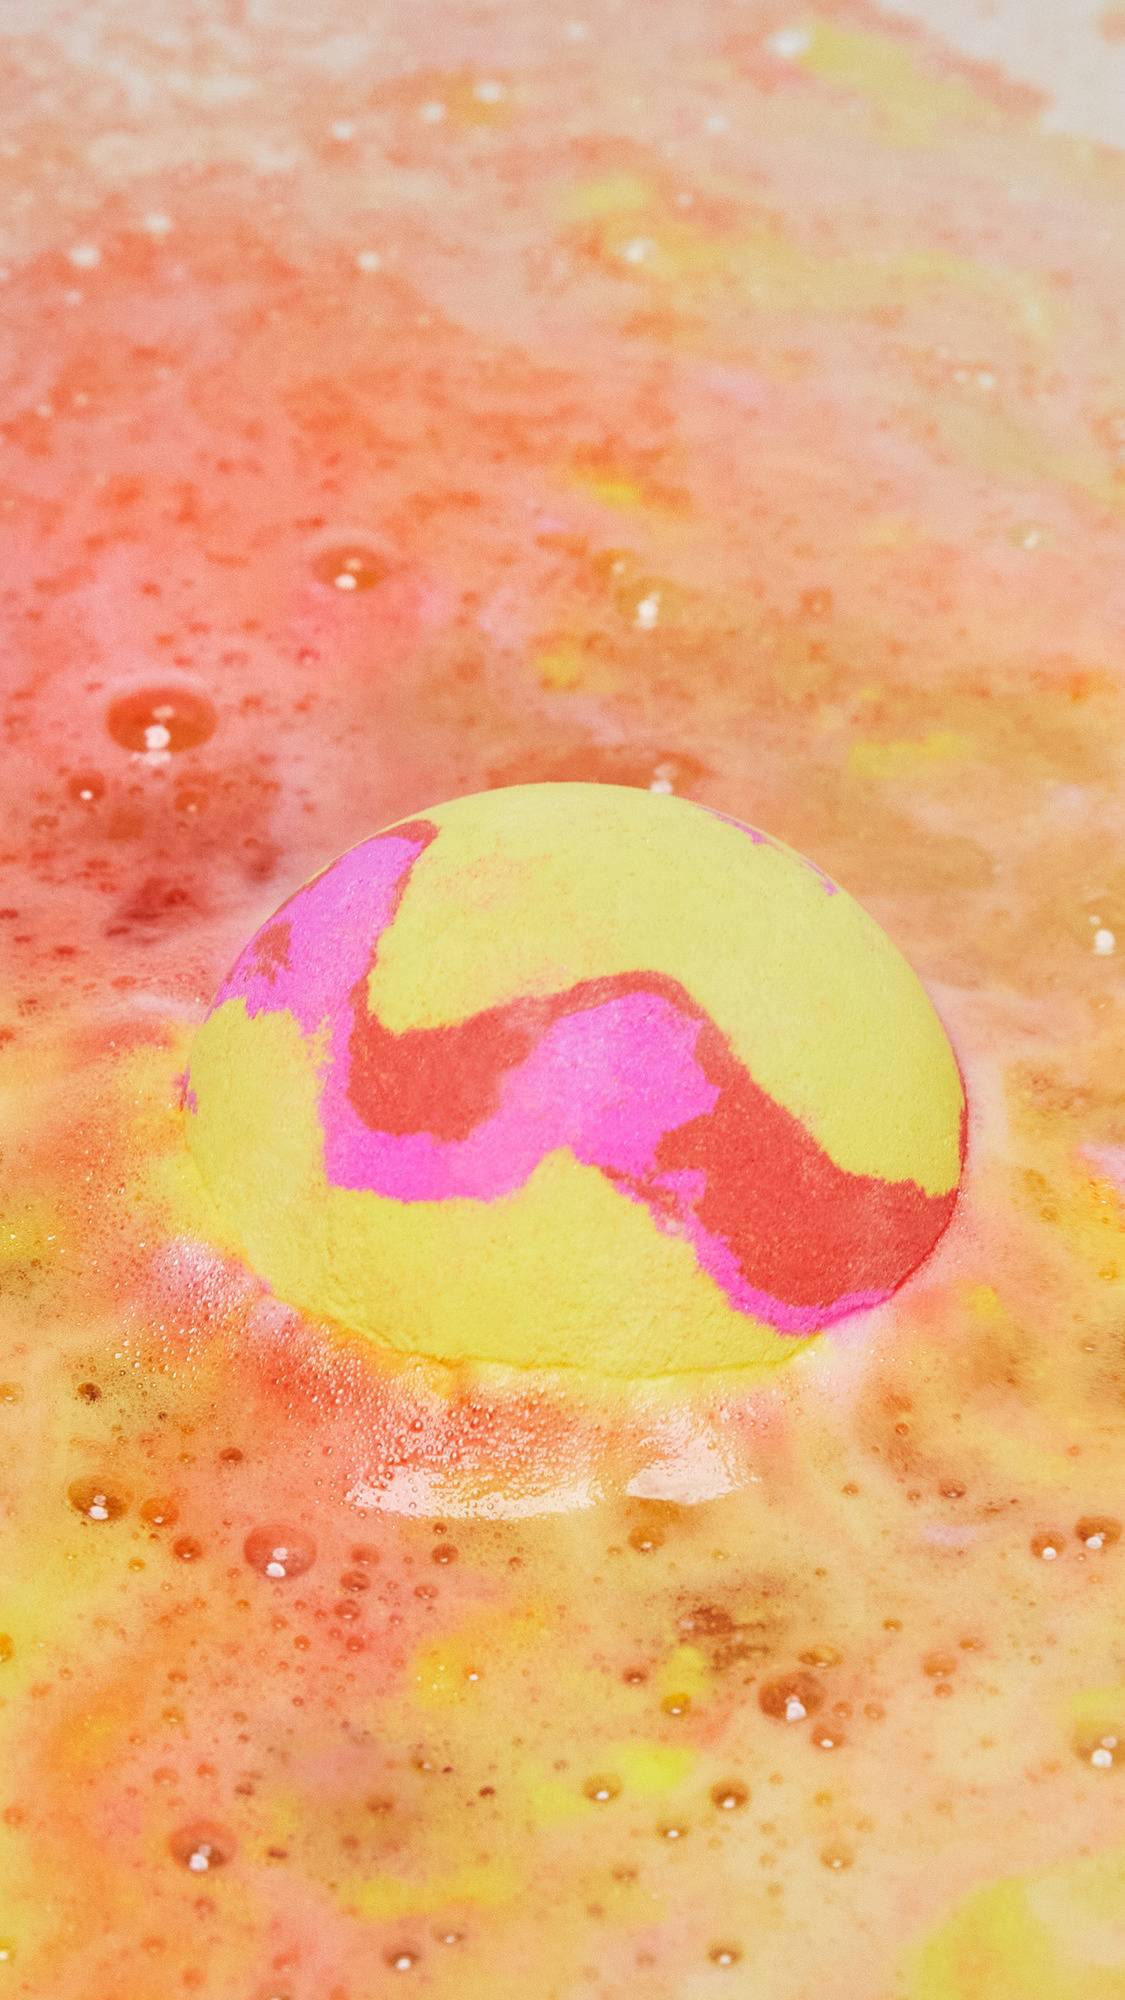 The Passion bath bomb is sitting on top of the water slowly dissolving creating swirling ripples of yellow, pink and orange. 